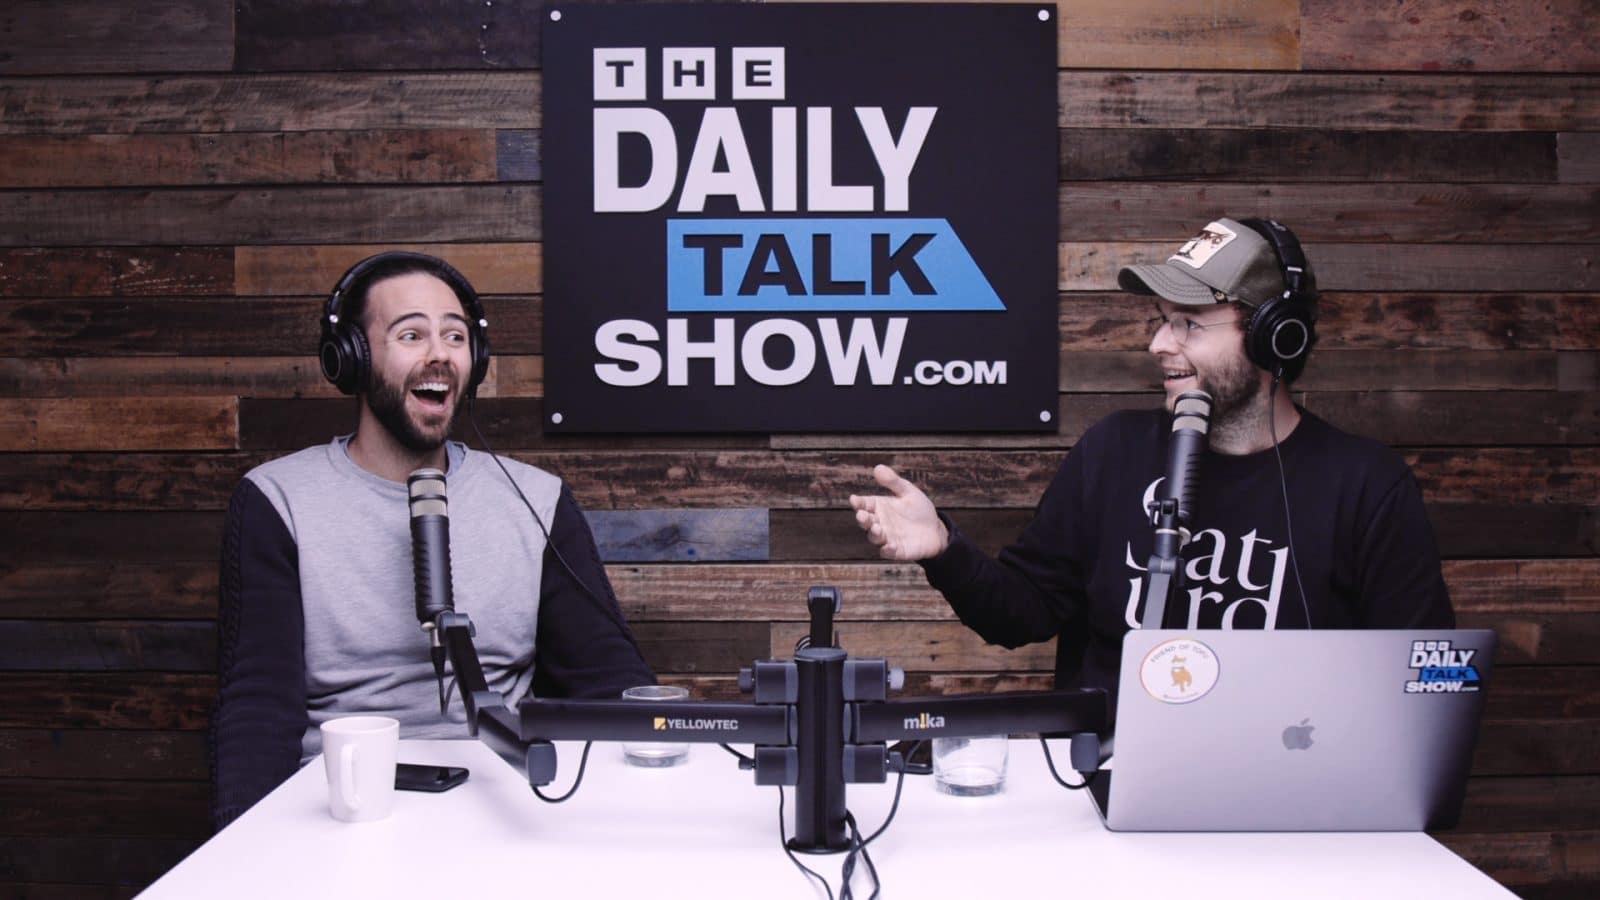 The-Daily-Talk-Show-411